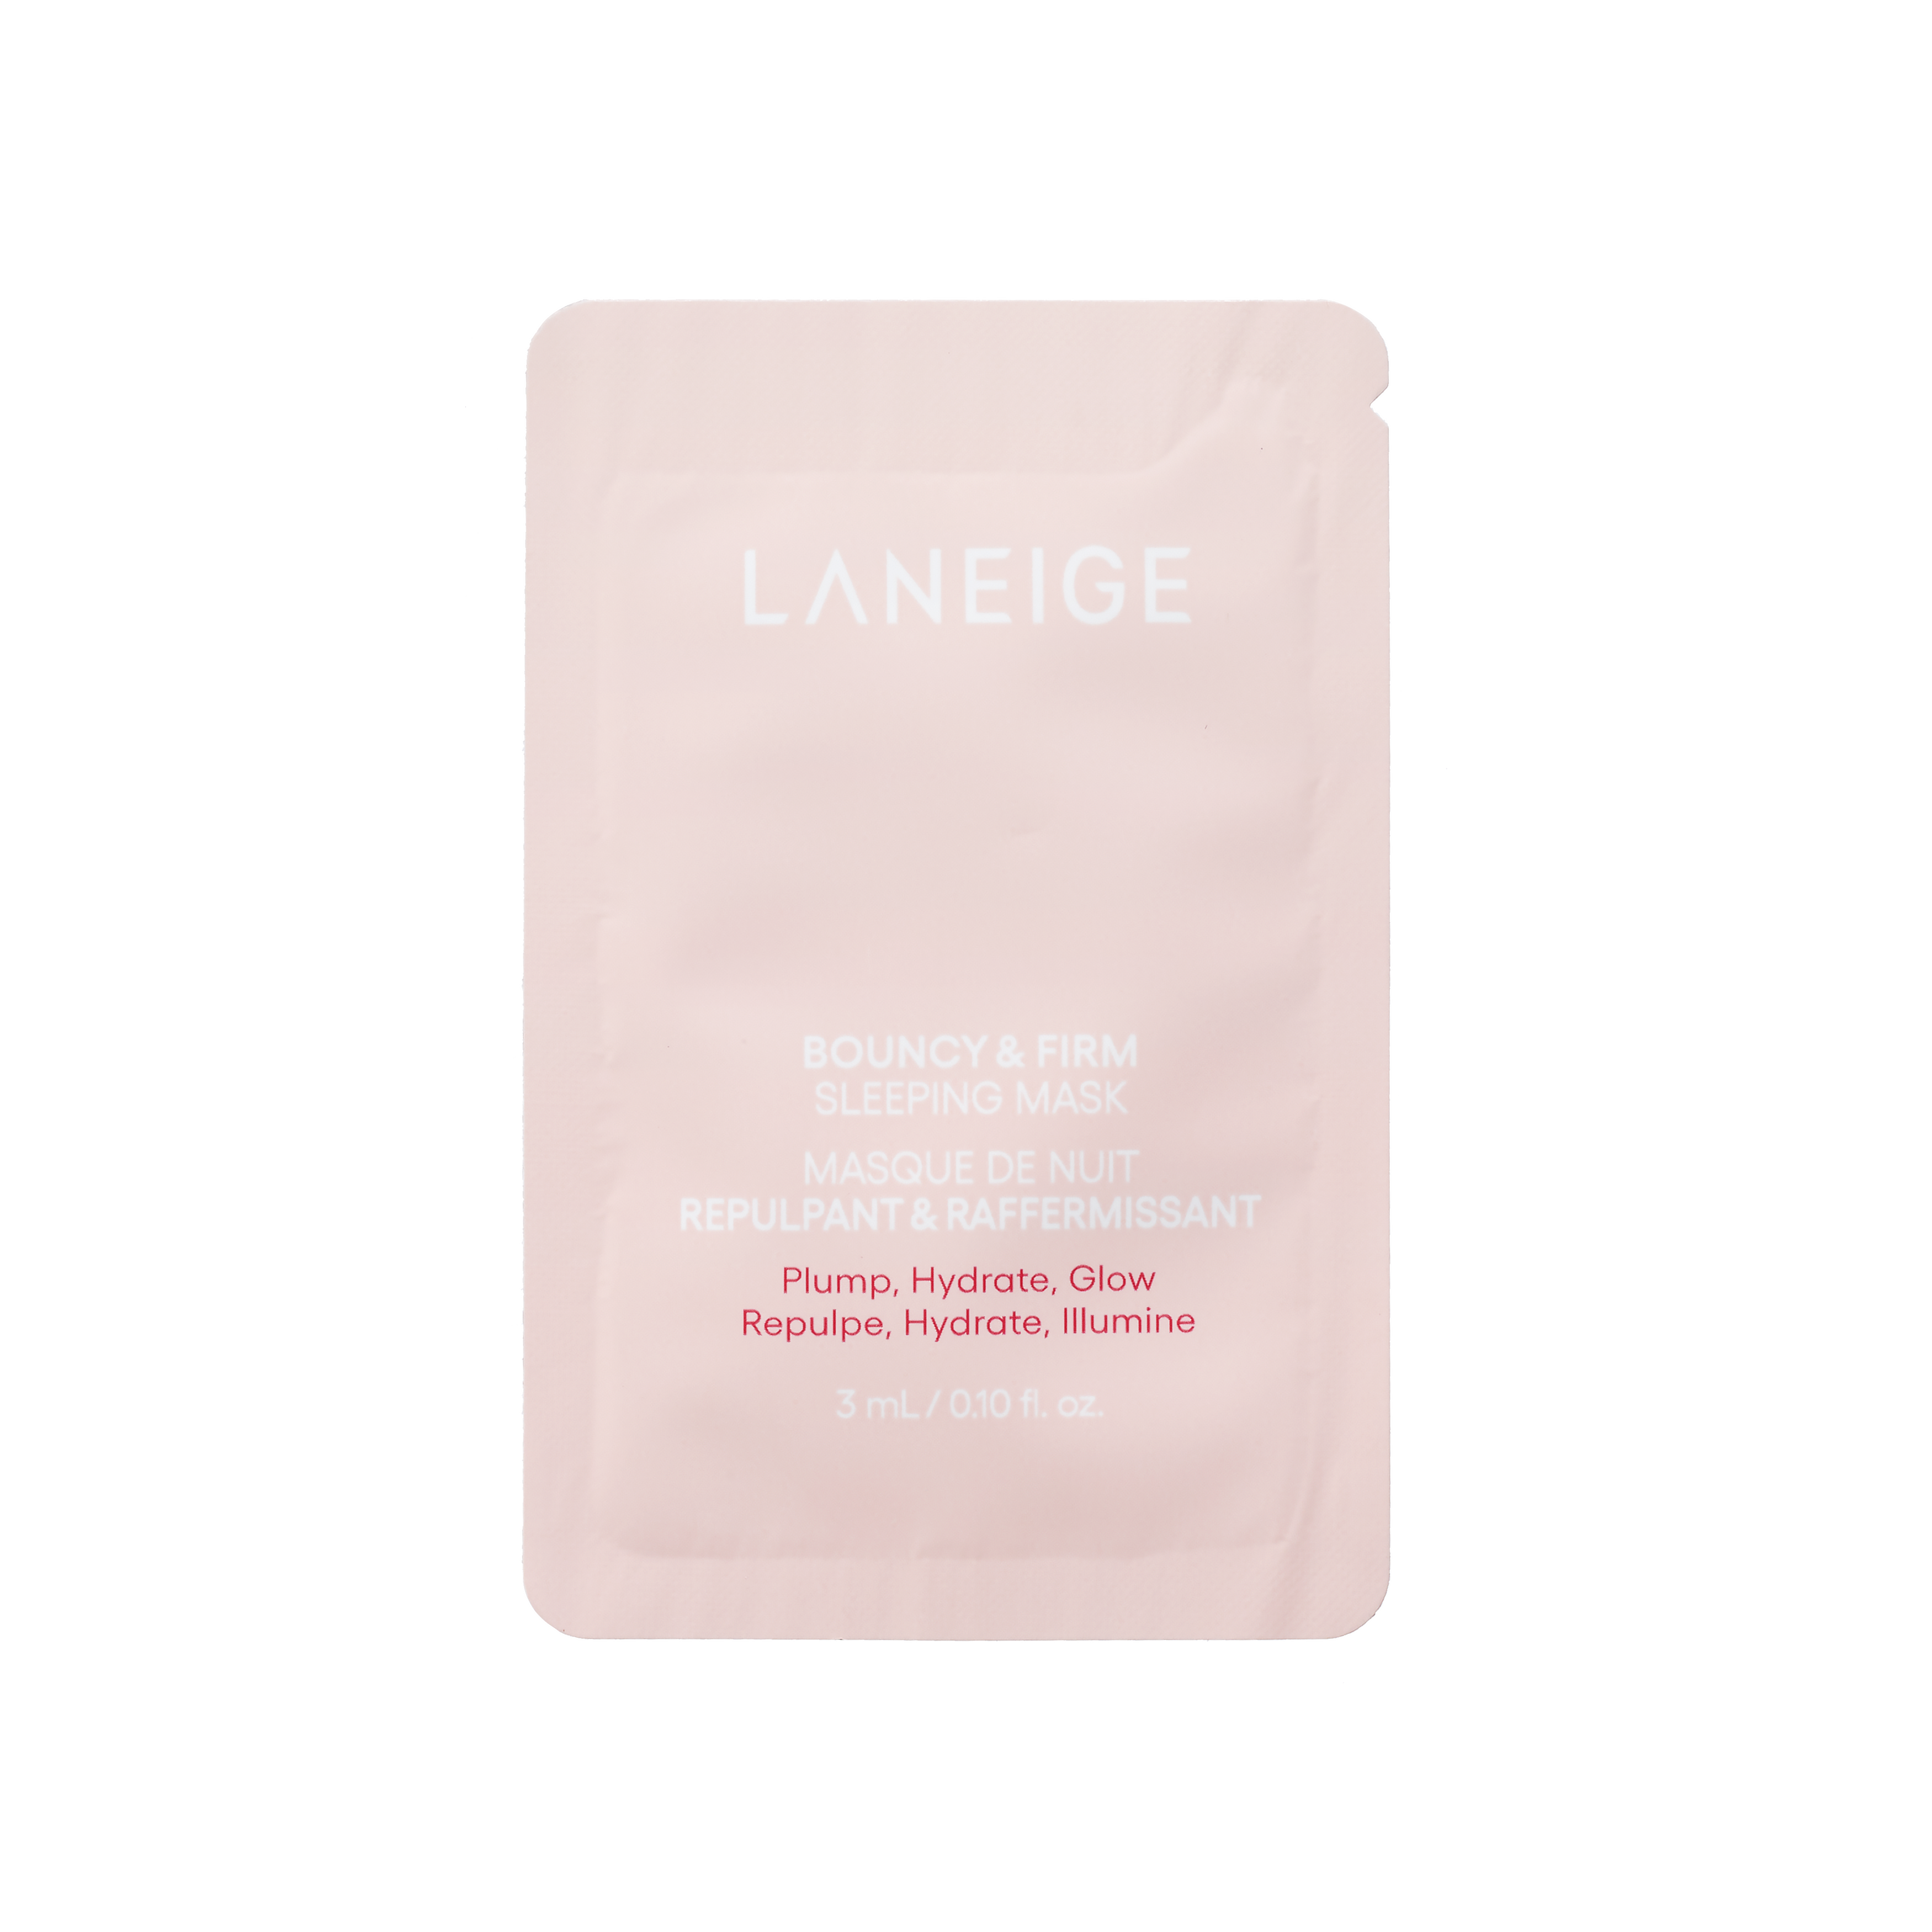 » Laneige Bouncy & Firm Sleeping Mask 3ml (Only For Gladish Live) (100% off)